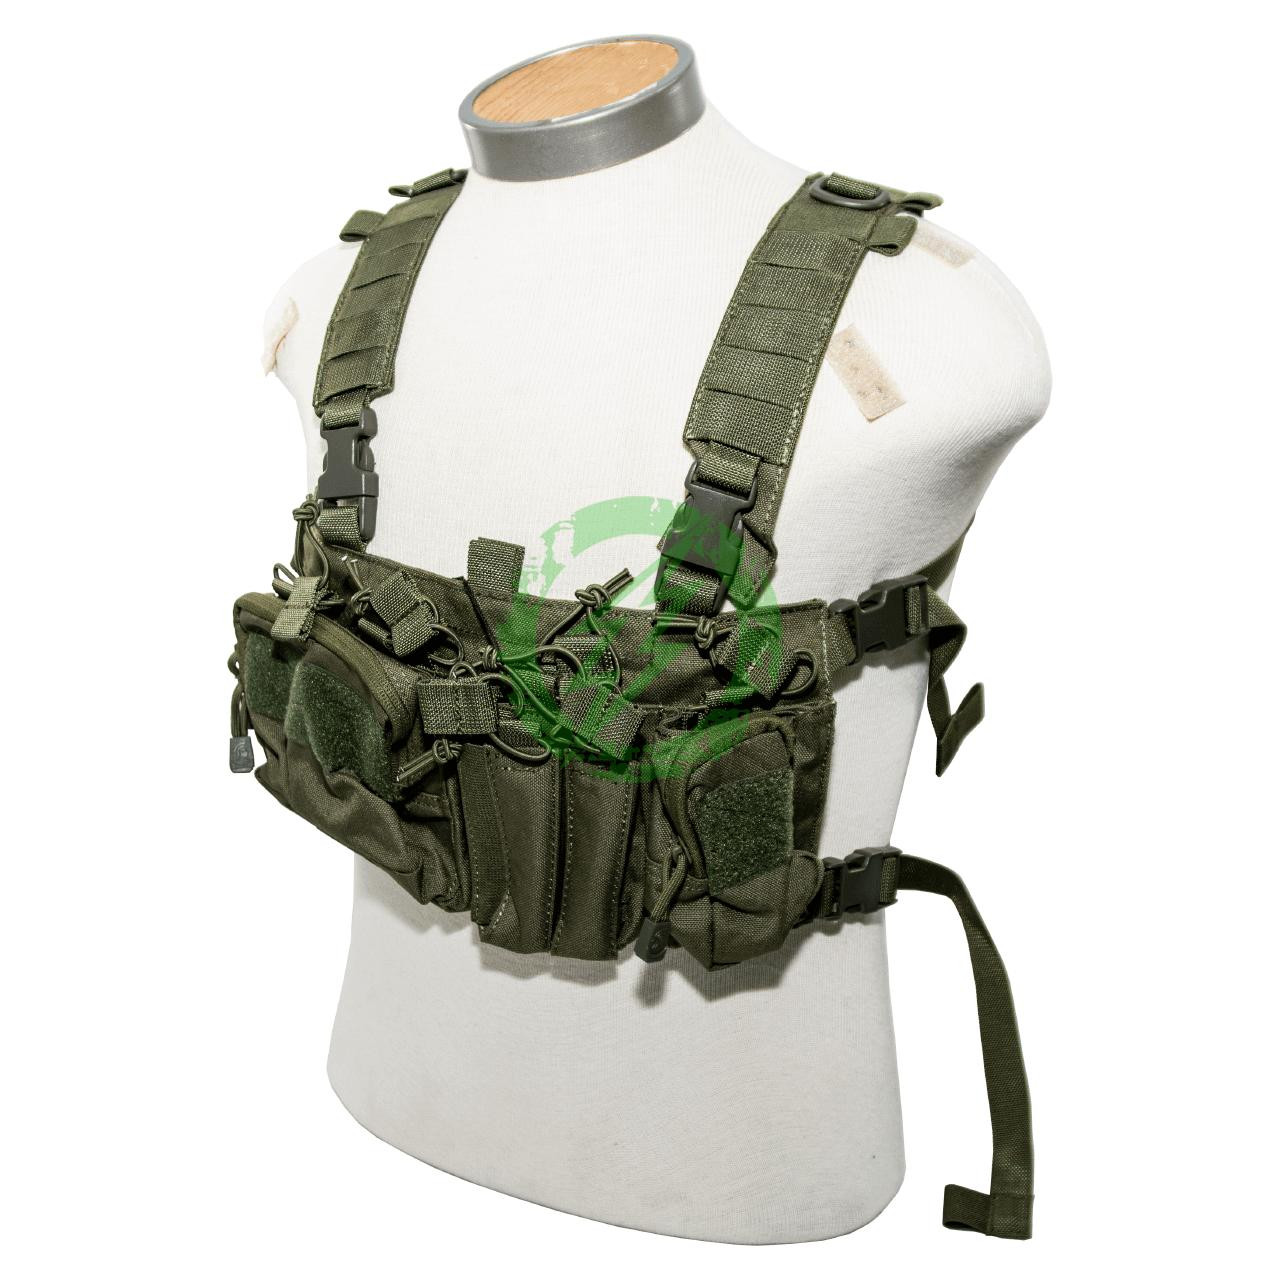  Lancer Tactical OD Green Adaptive Sniper Chest Rig 